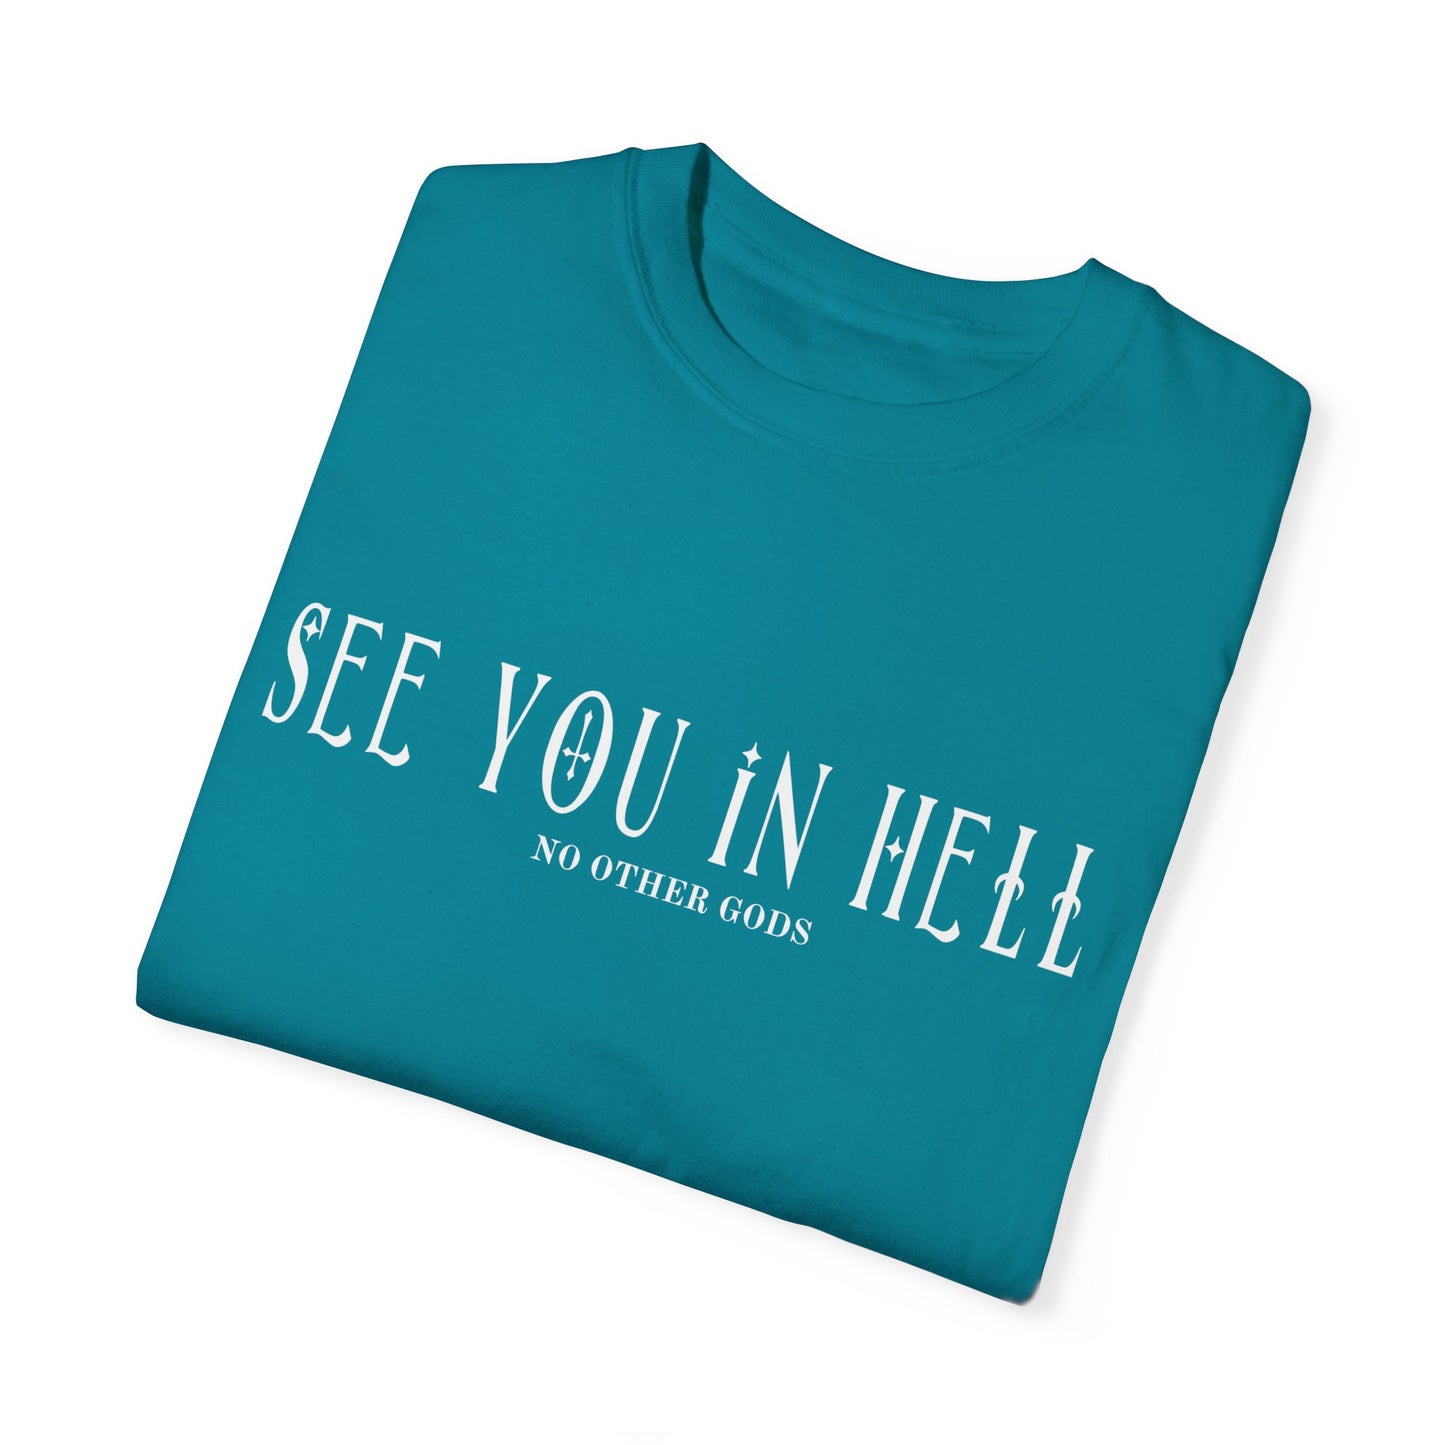 #see you in hell // PREMIUM TEE